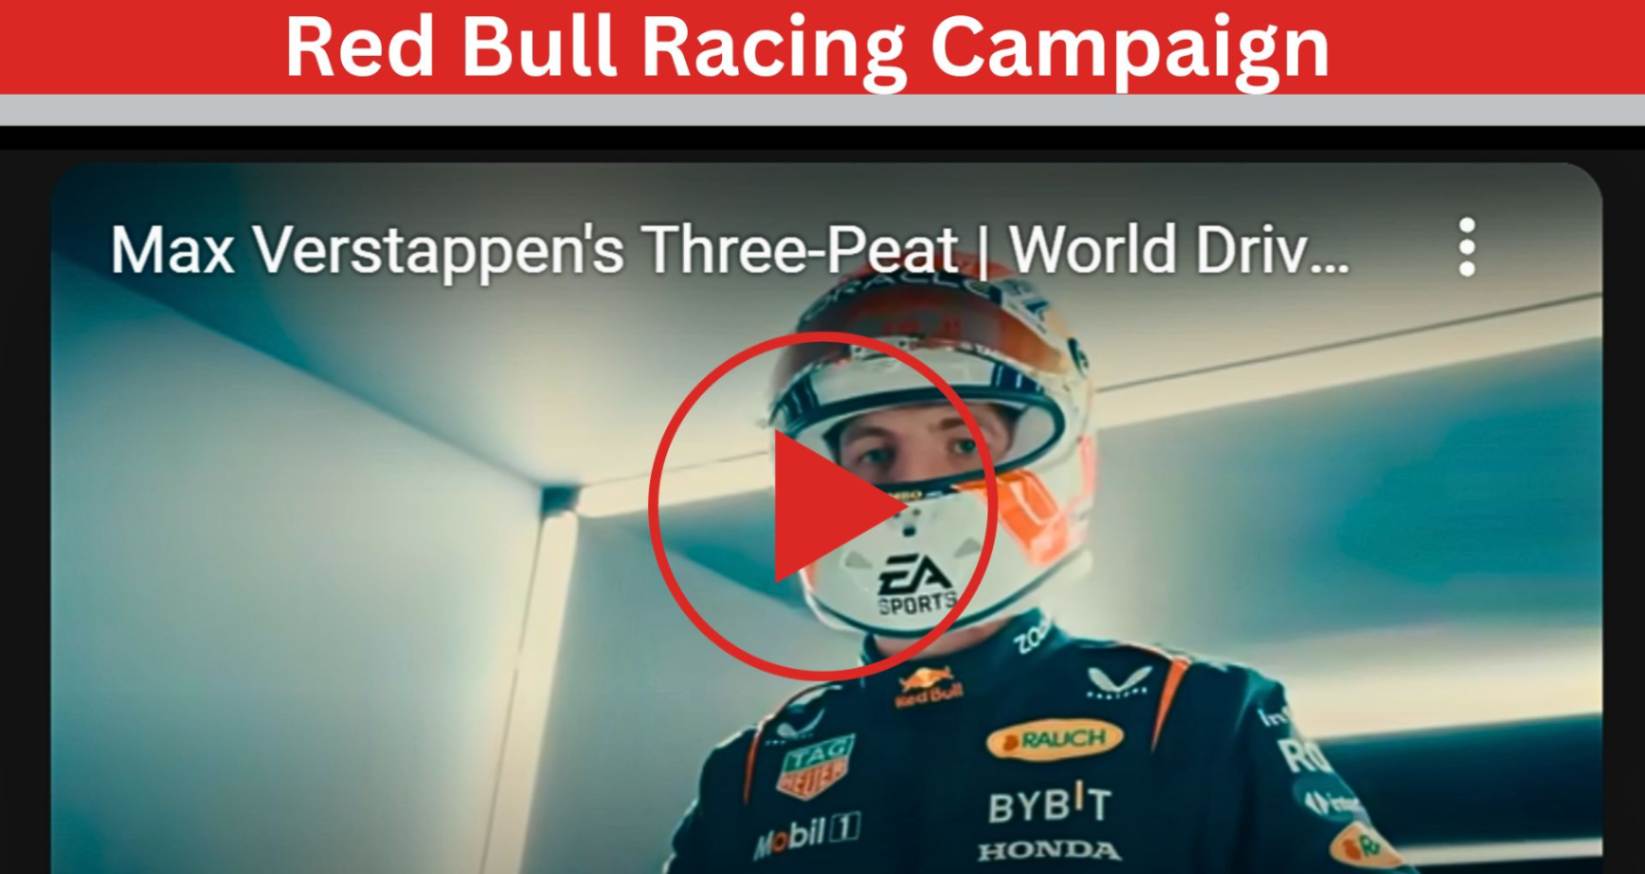 content marketing vs traditional marketing Red Bull Racing Campaign video